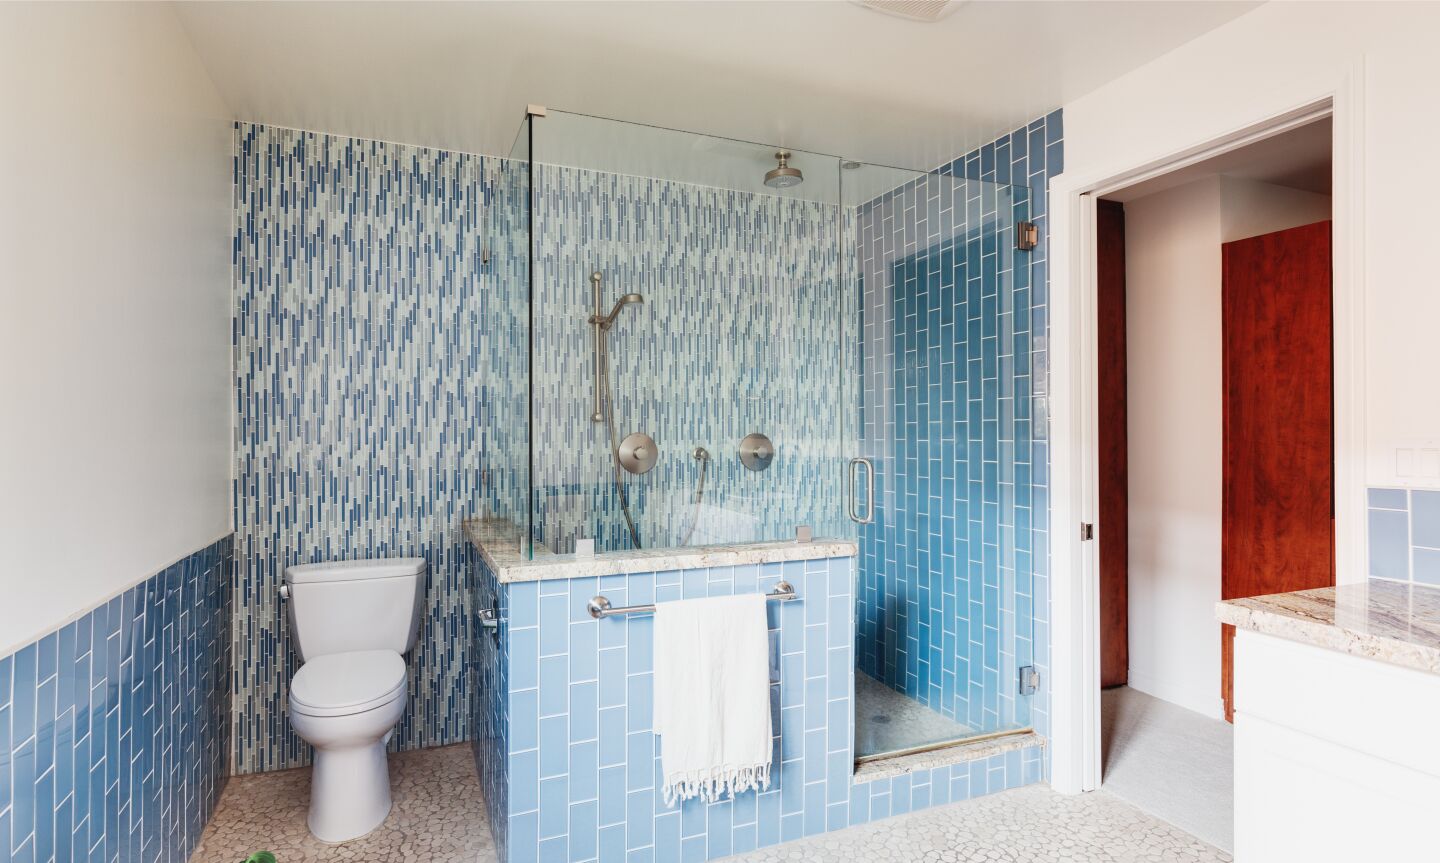 The bathroom in shades and patterns of blue.